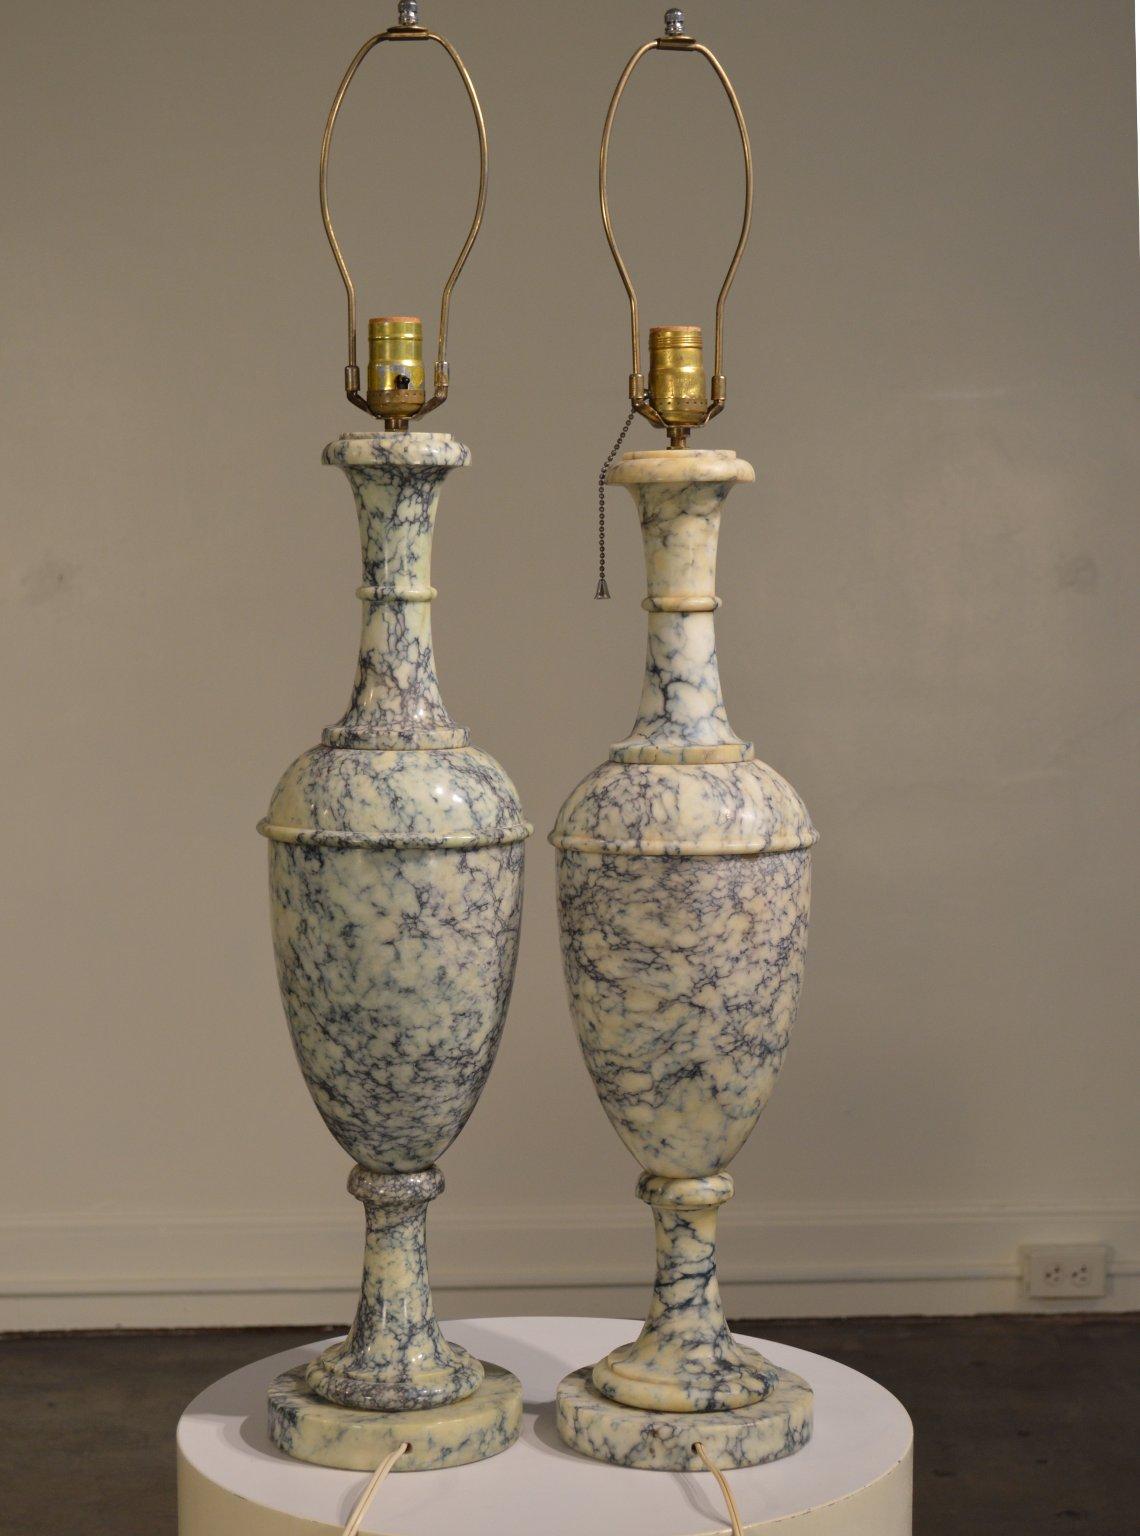 A large pair of Italian marble urn lamps. Very unique and dynamic blue-green veined marble resembling bleu or Roquefort cheese, turned into an elegant interpretation of neoclassical form.